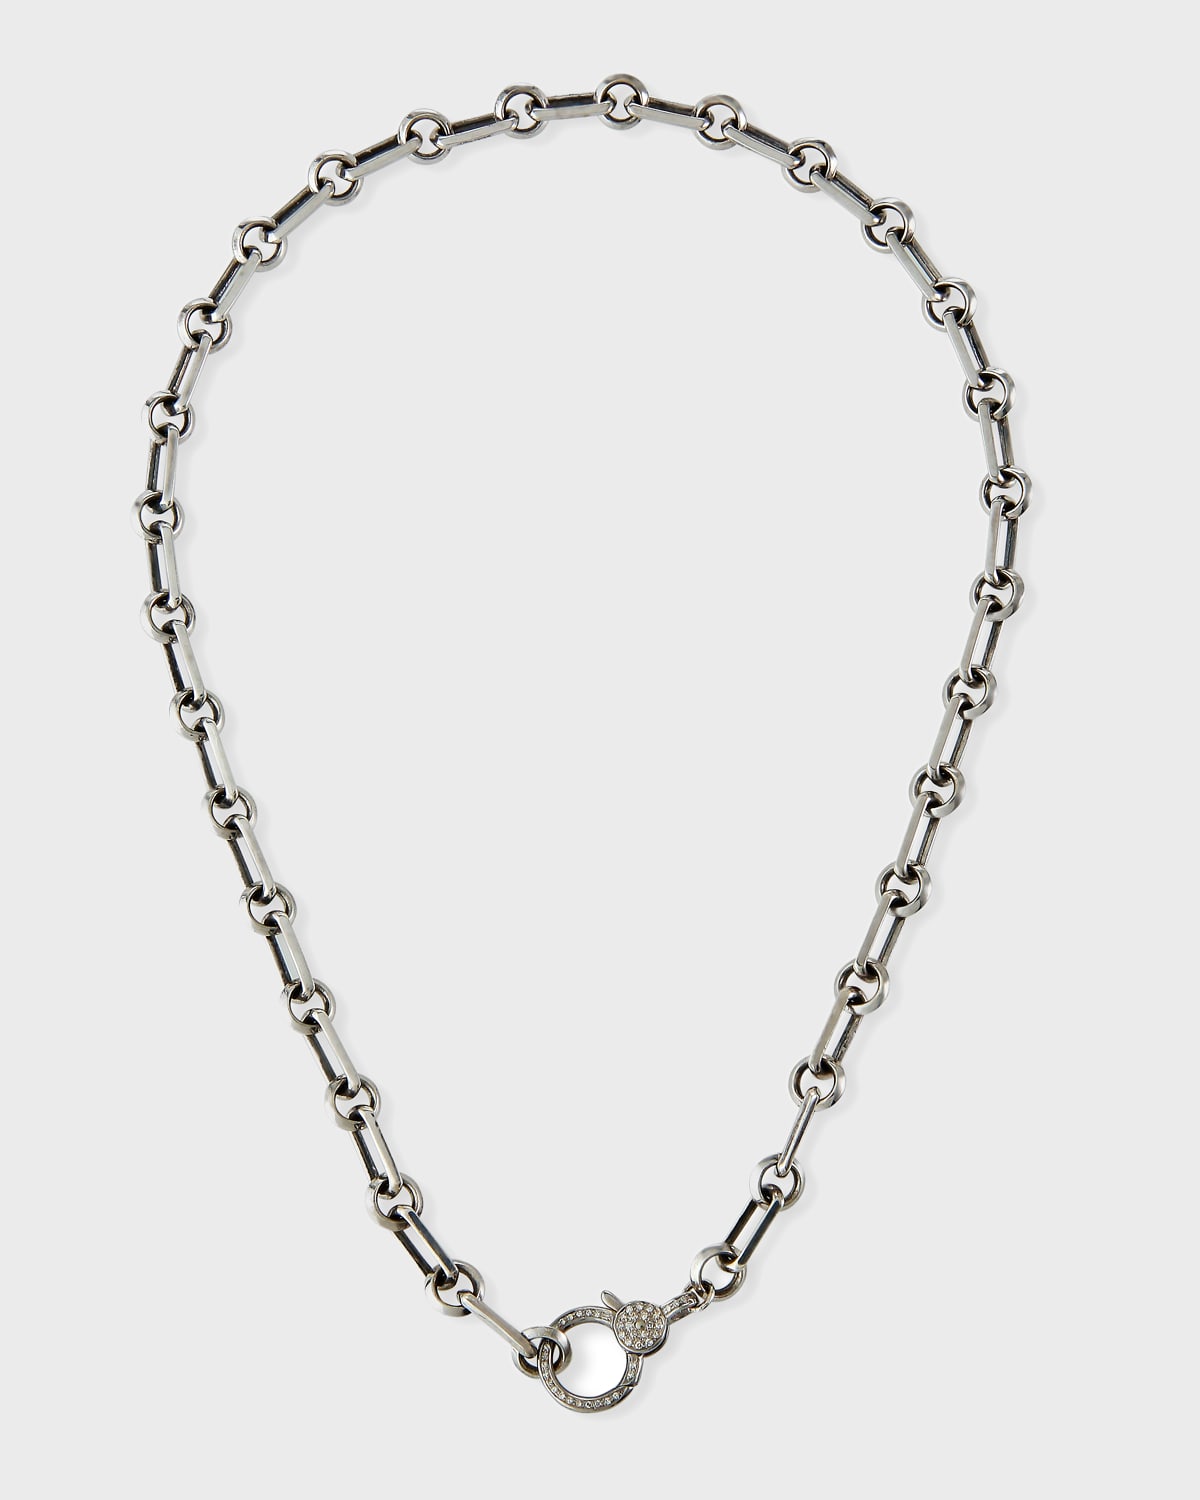 Oxidized Sterling Silver 7mm Curb Chain Necklace with Diamond Clasp